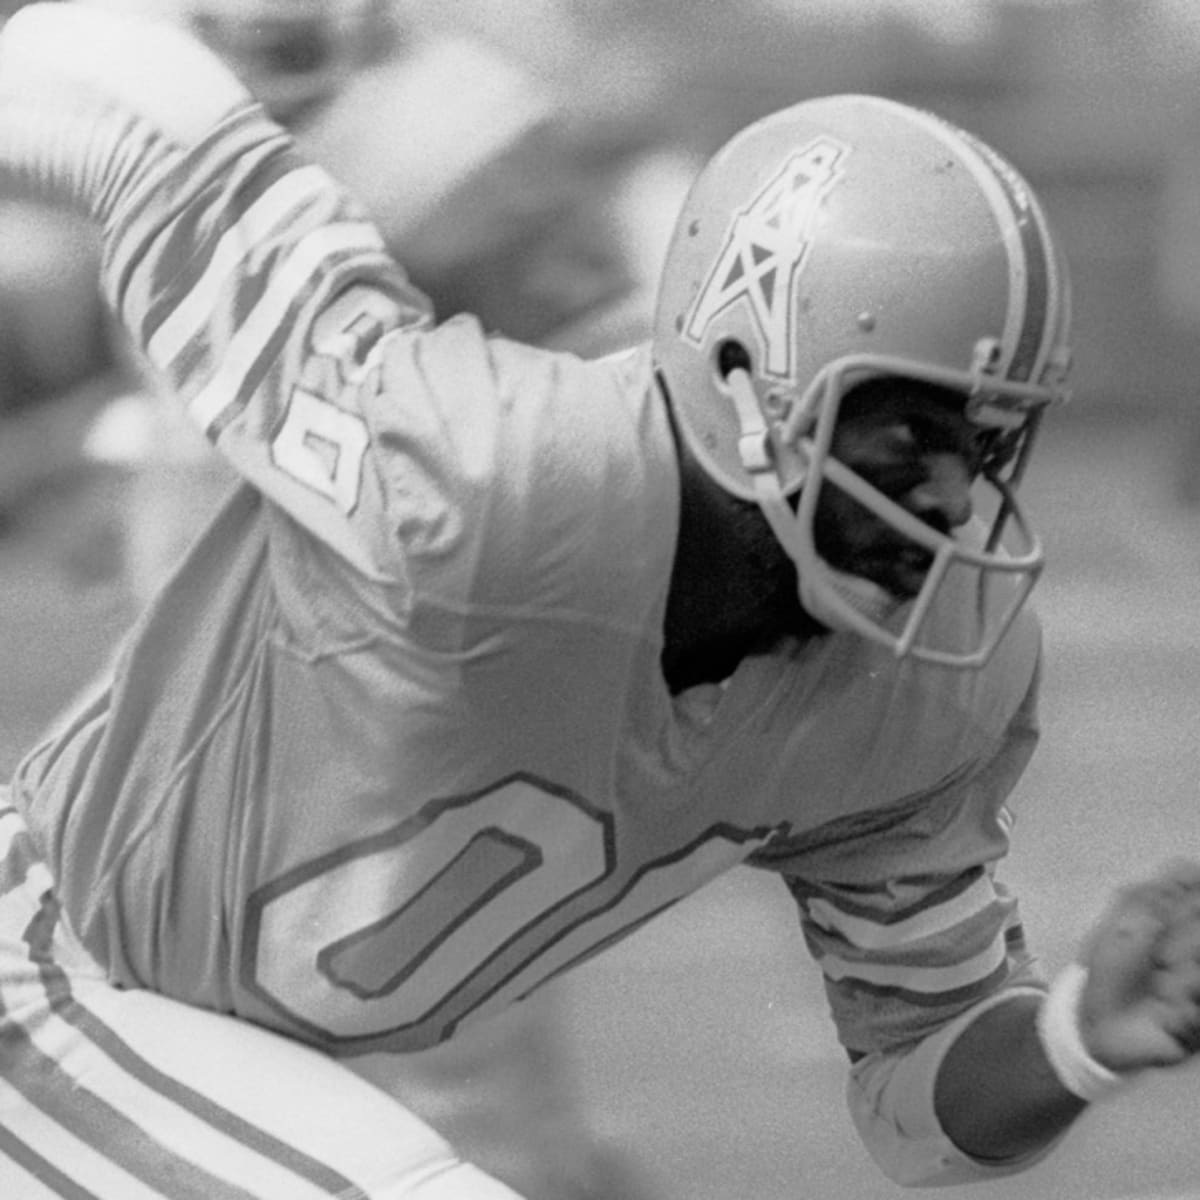 Former Pro Bowler Ken Burrough dies at age 73 - Sports Illustrated